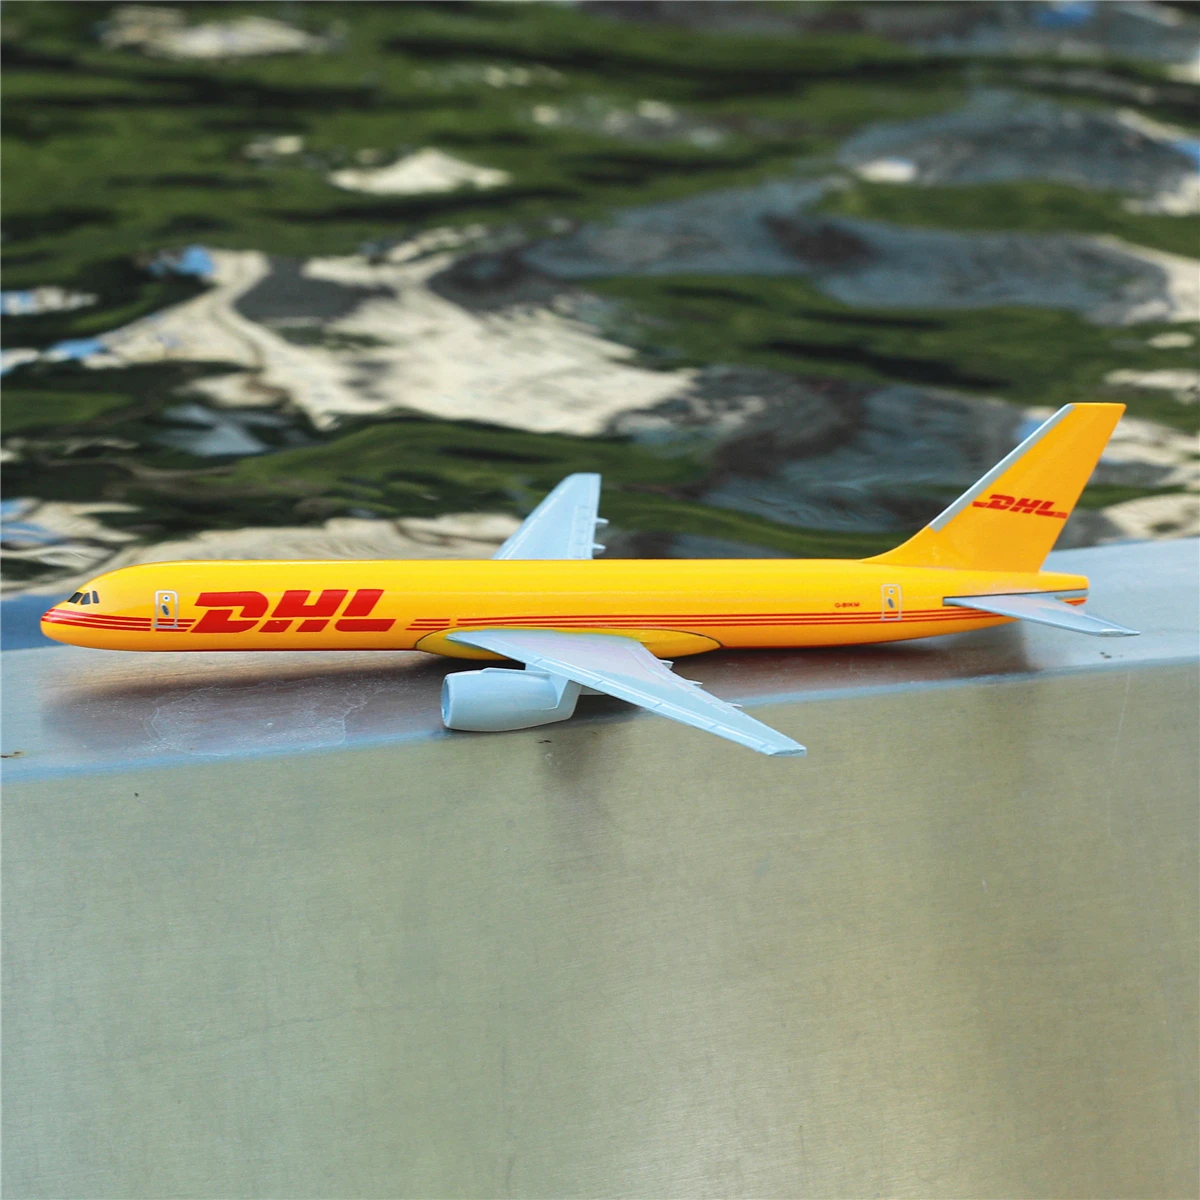 Scale 1:400 Metal Aircraft Replica 15cm Fedex UPS DHL Airplane Diecast Miniature Xmas Gift Kids Room Decor Model Toys for Boys images - 6